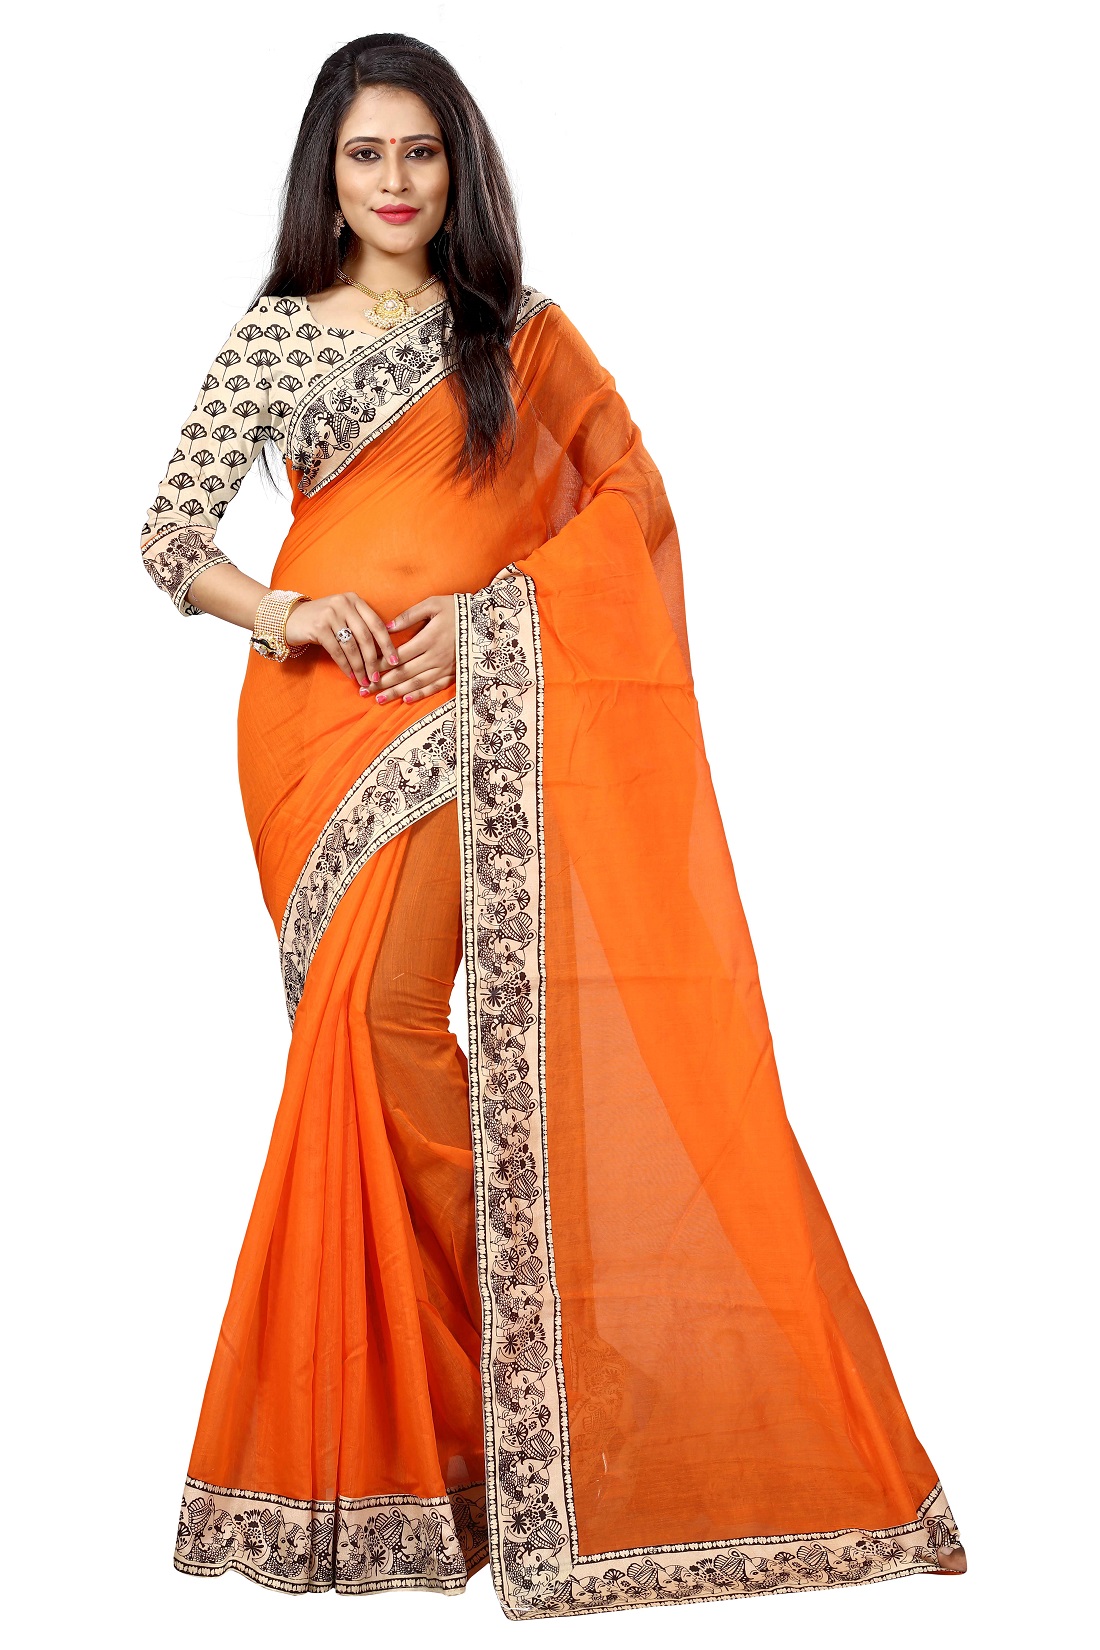 Buy Indian Style Sarees New Arrivals Latest Women's Orange Color ...